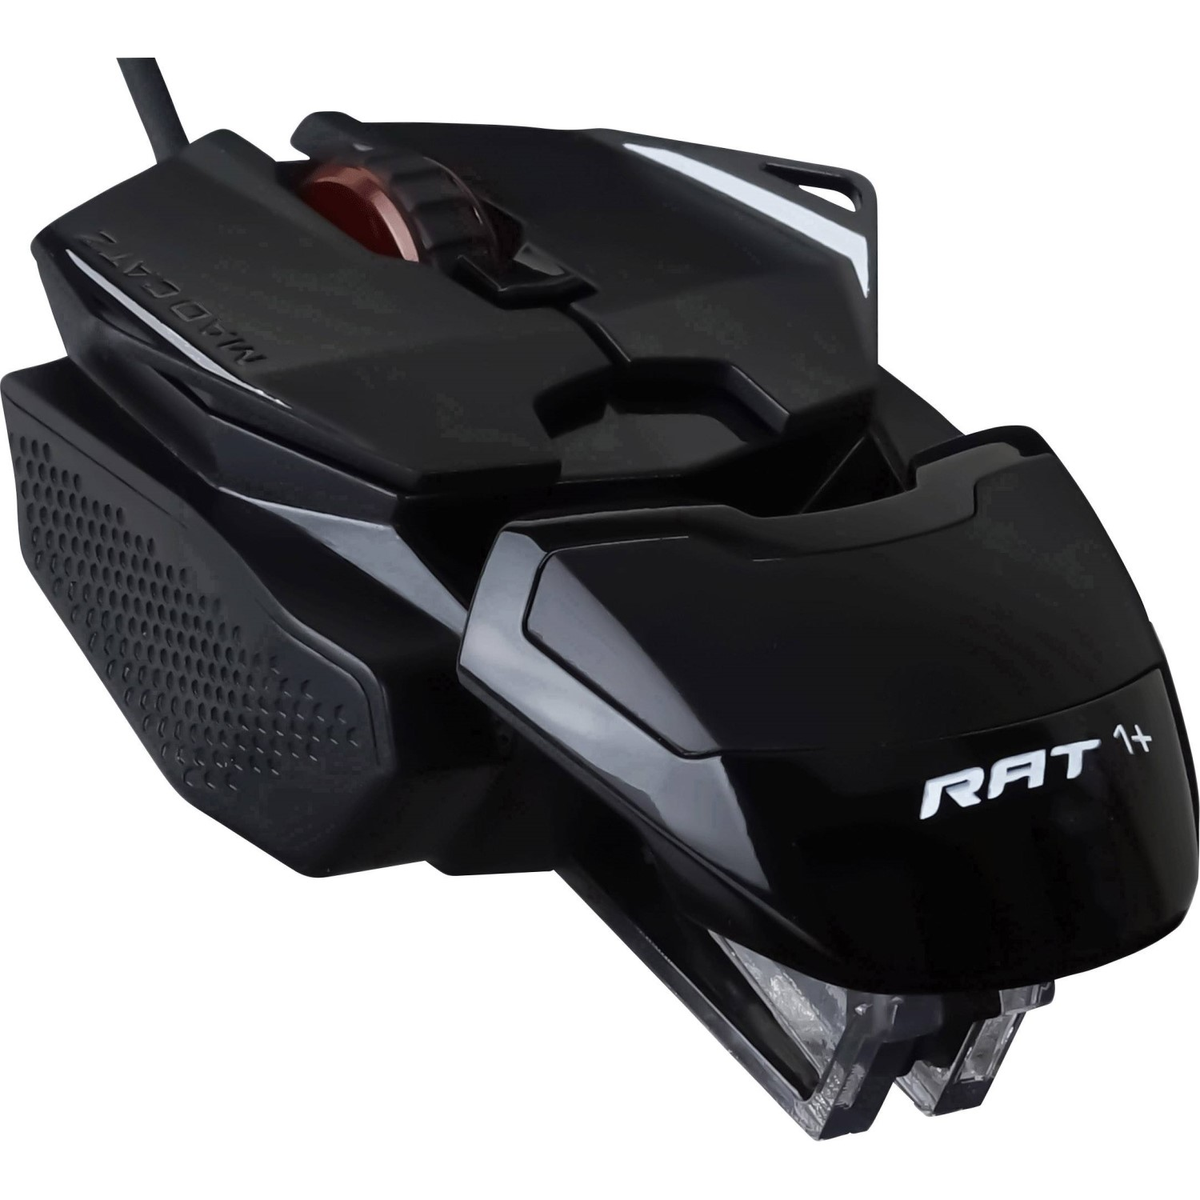 MAD CATZ MR01MCINBL000-0 R.A.T. Schwarz OPTICAL GAMING BL MOUSE, Gaming 1+ Maus